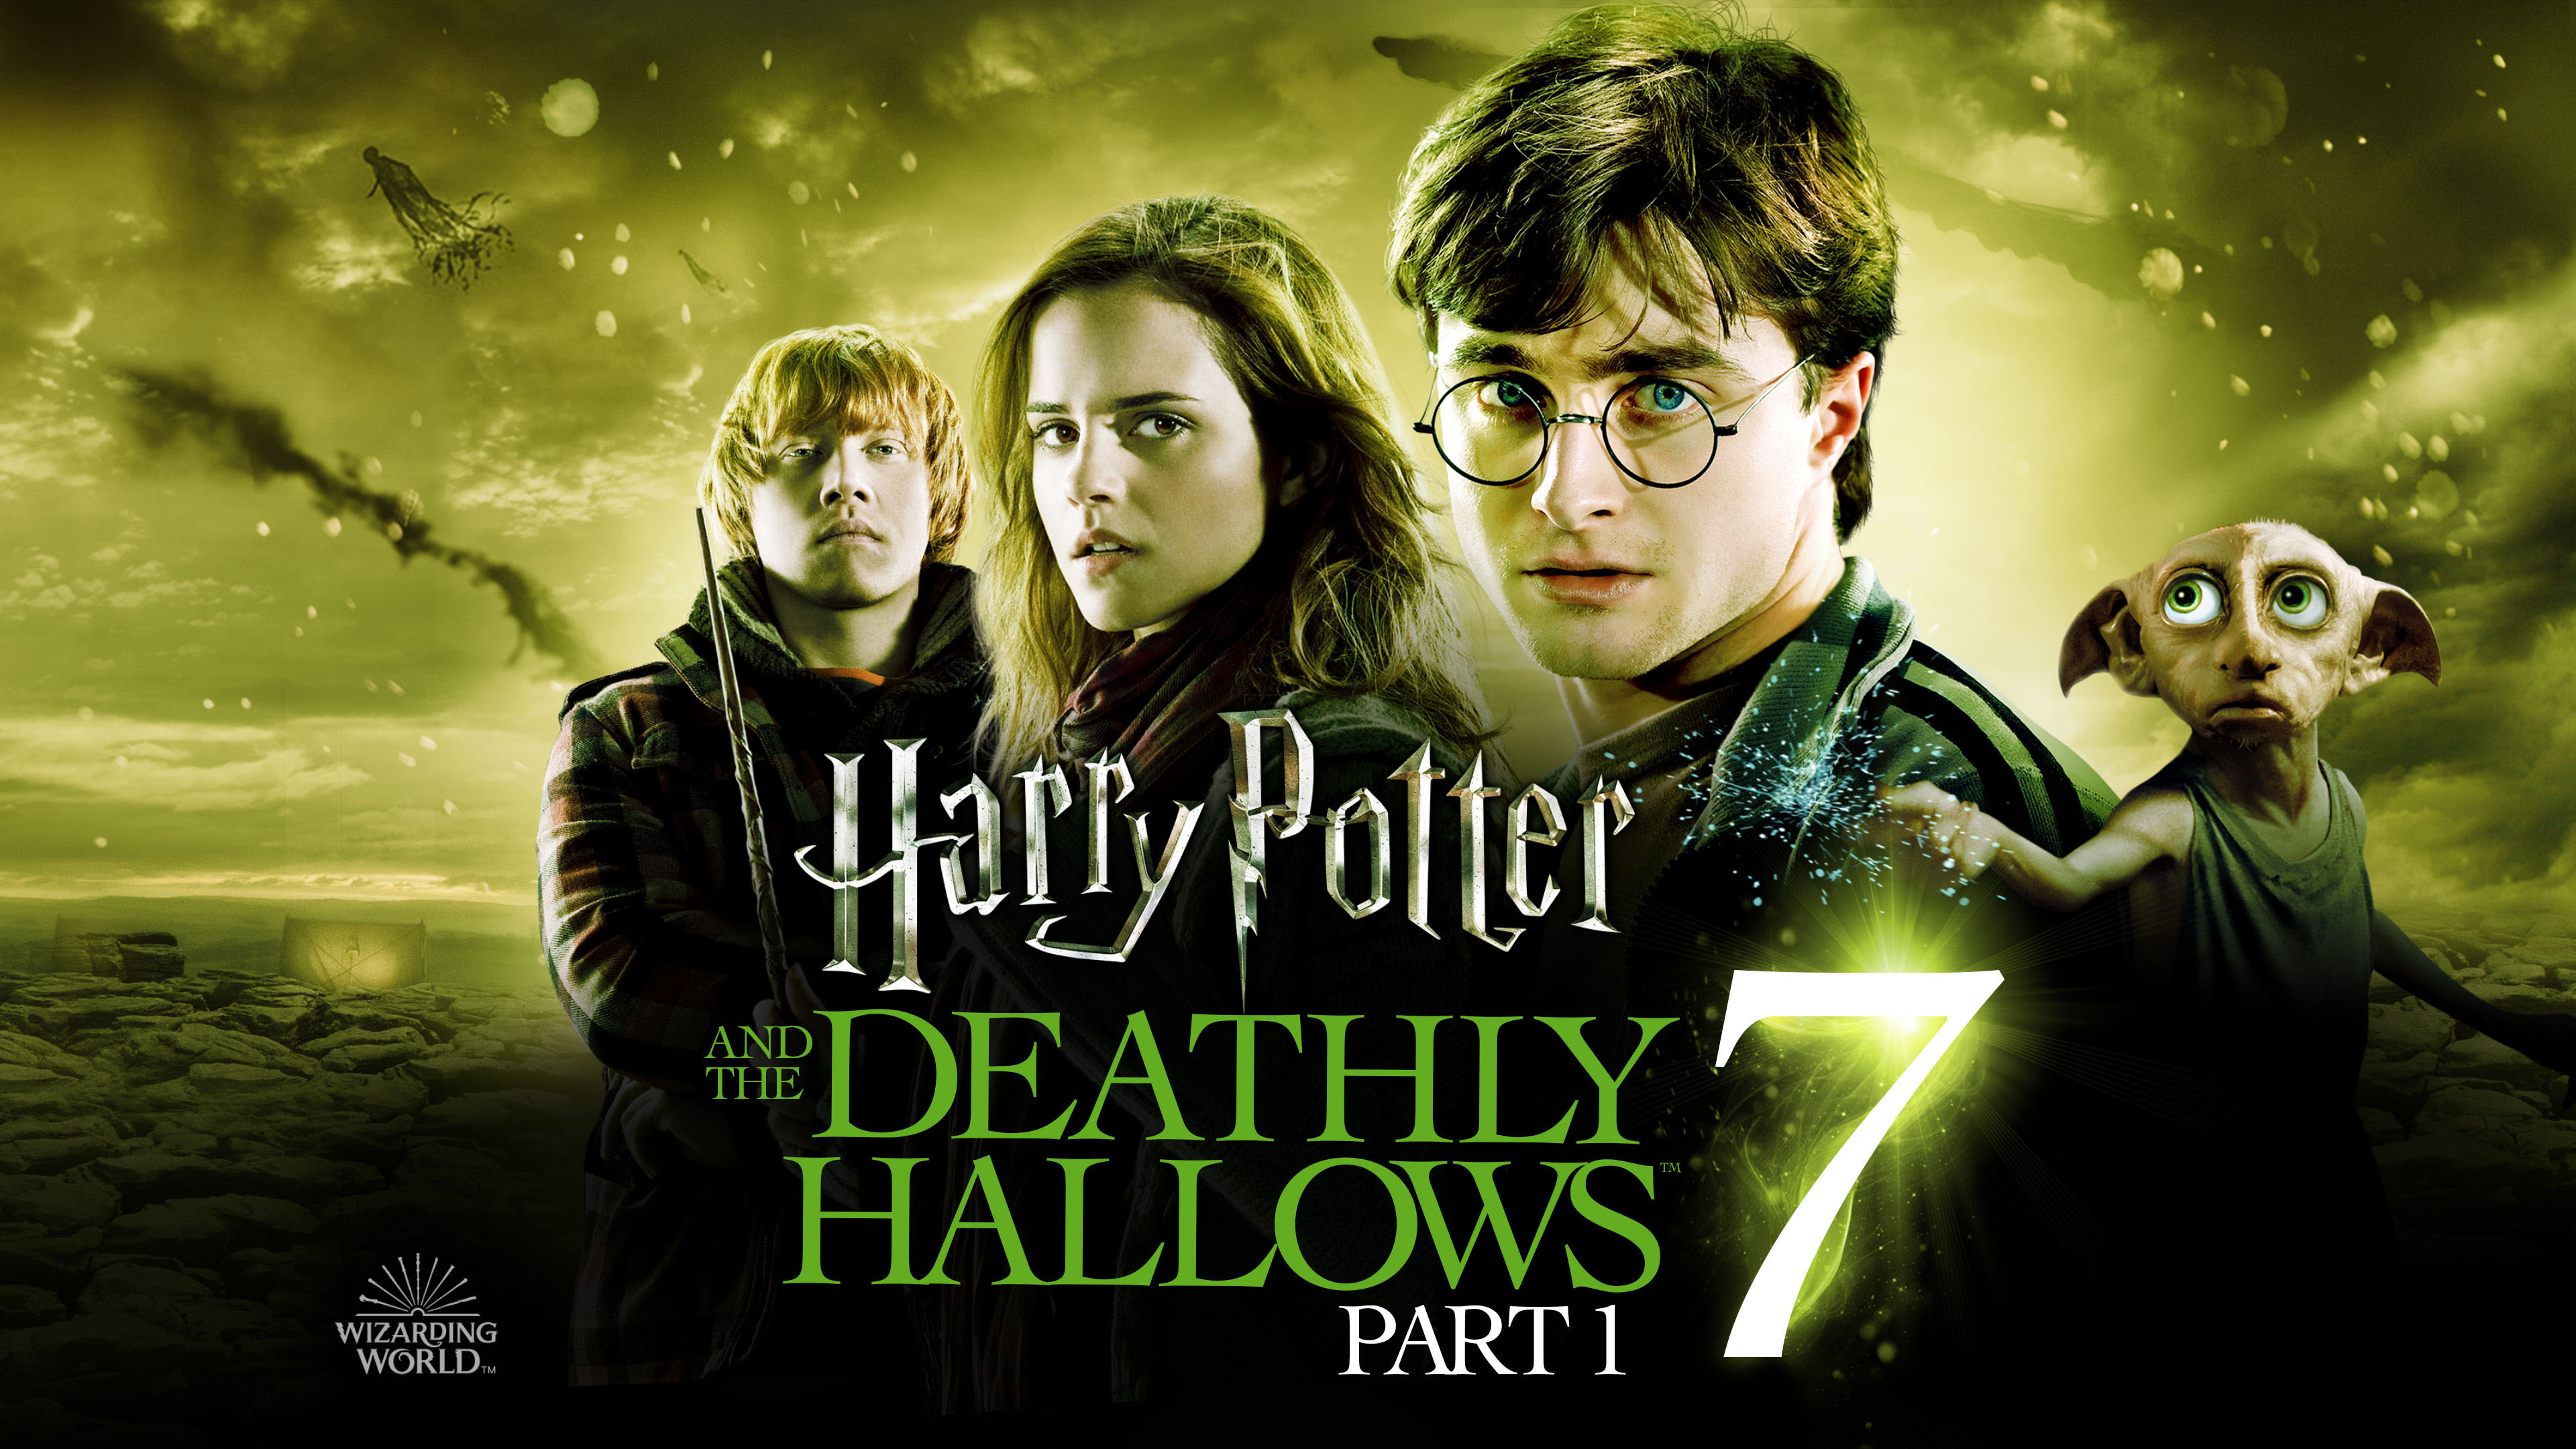 Harry Potter and the Deathly Hallows Part 1 Trivia